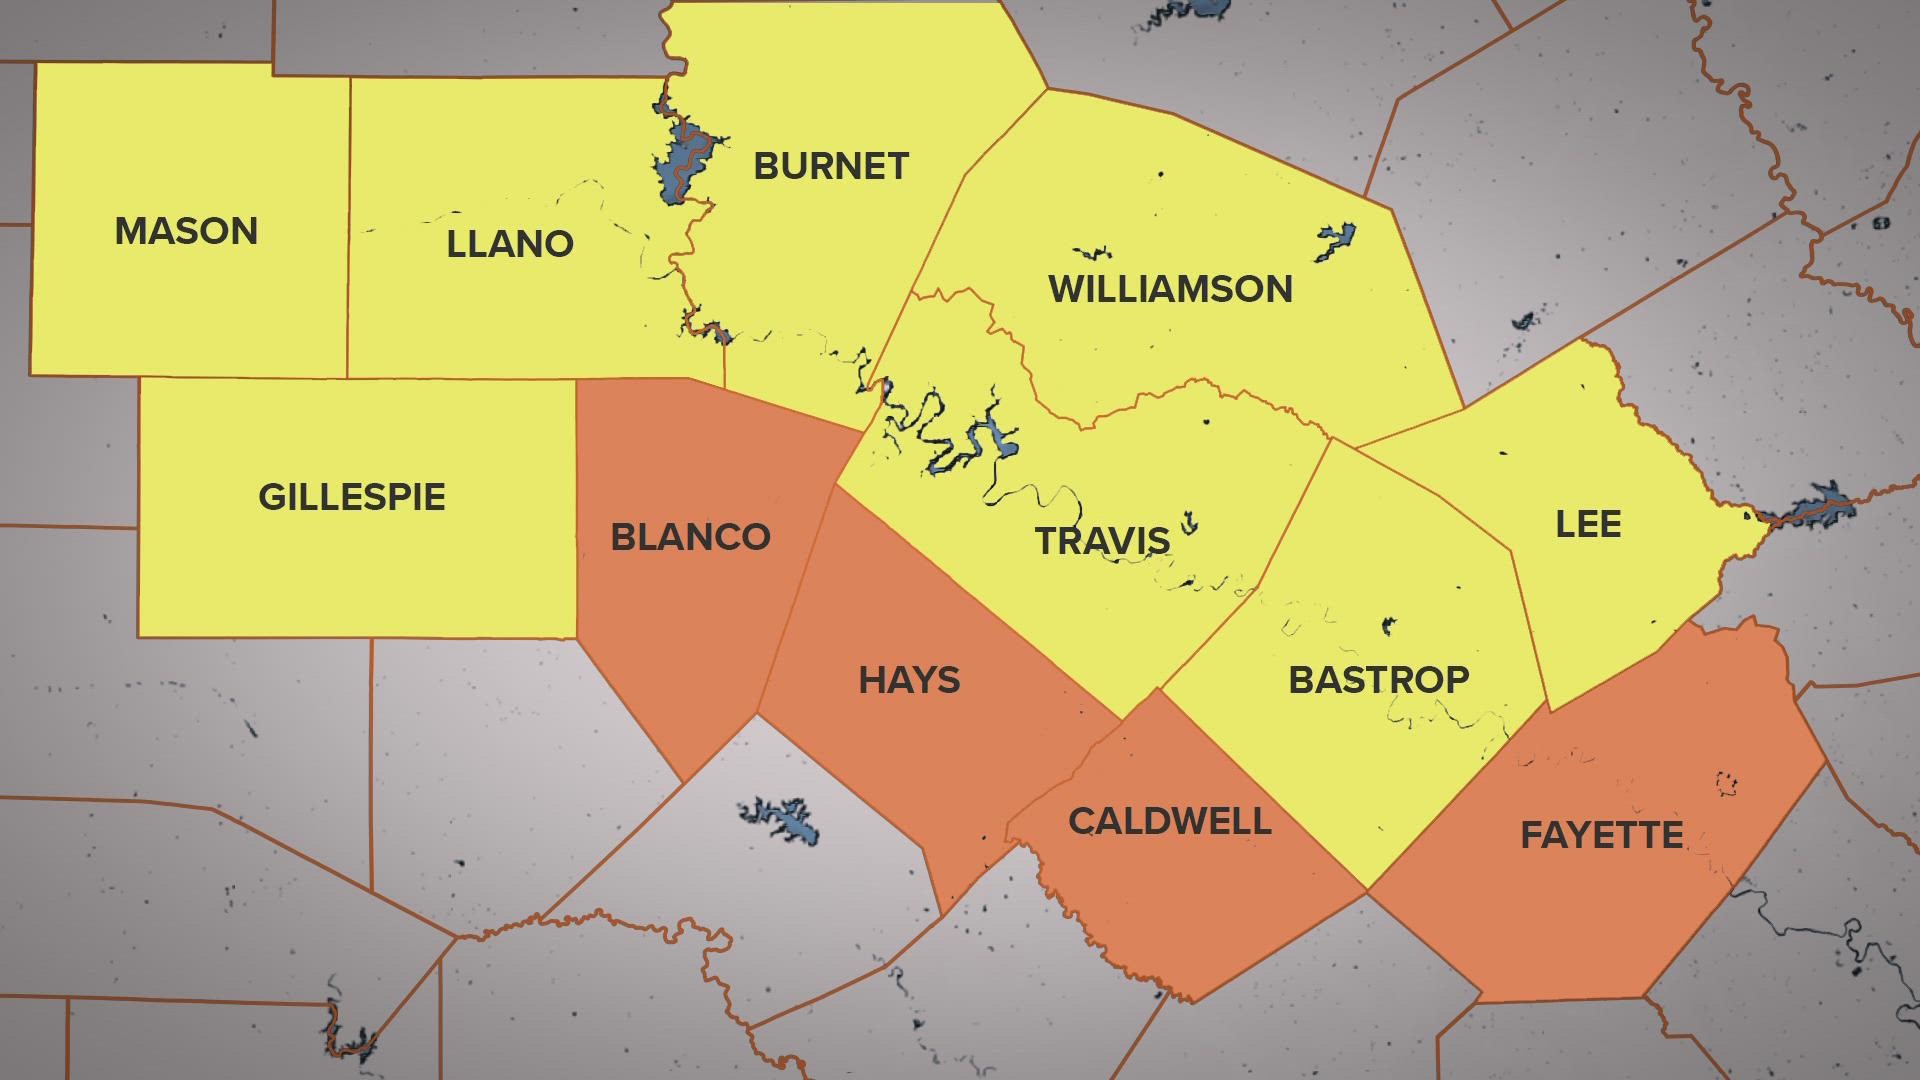 Most of the counties in the KVUE area are currently in the "medium" risk level.